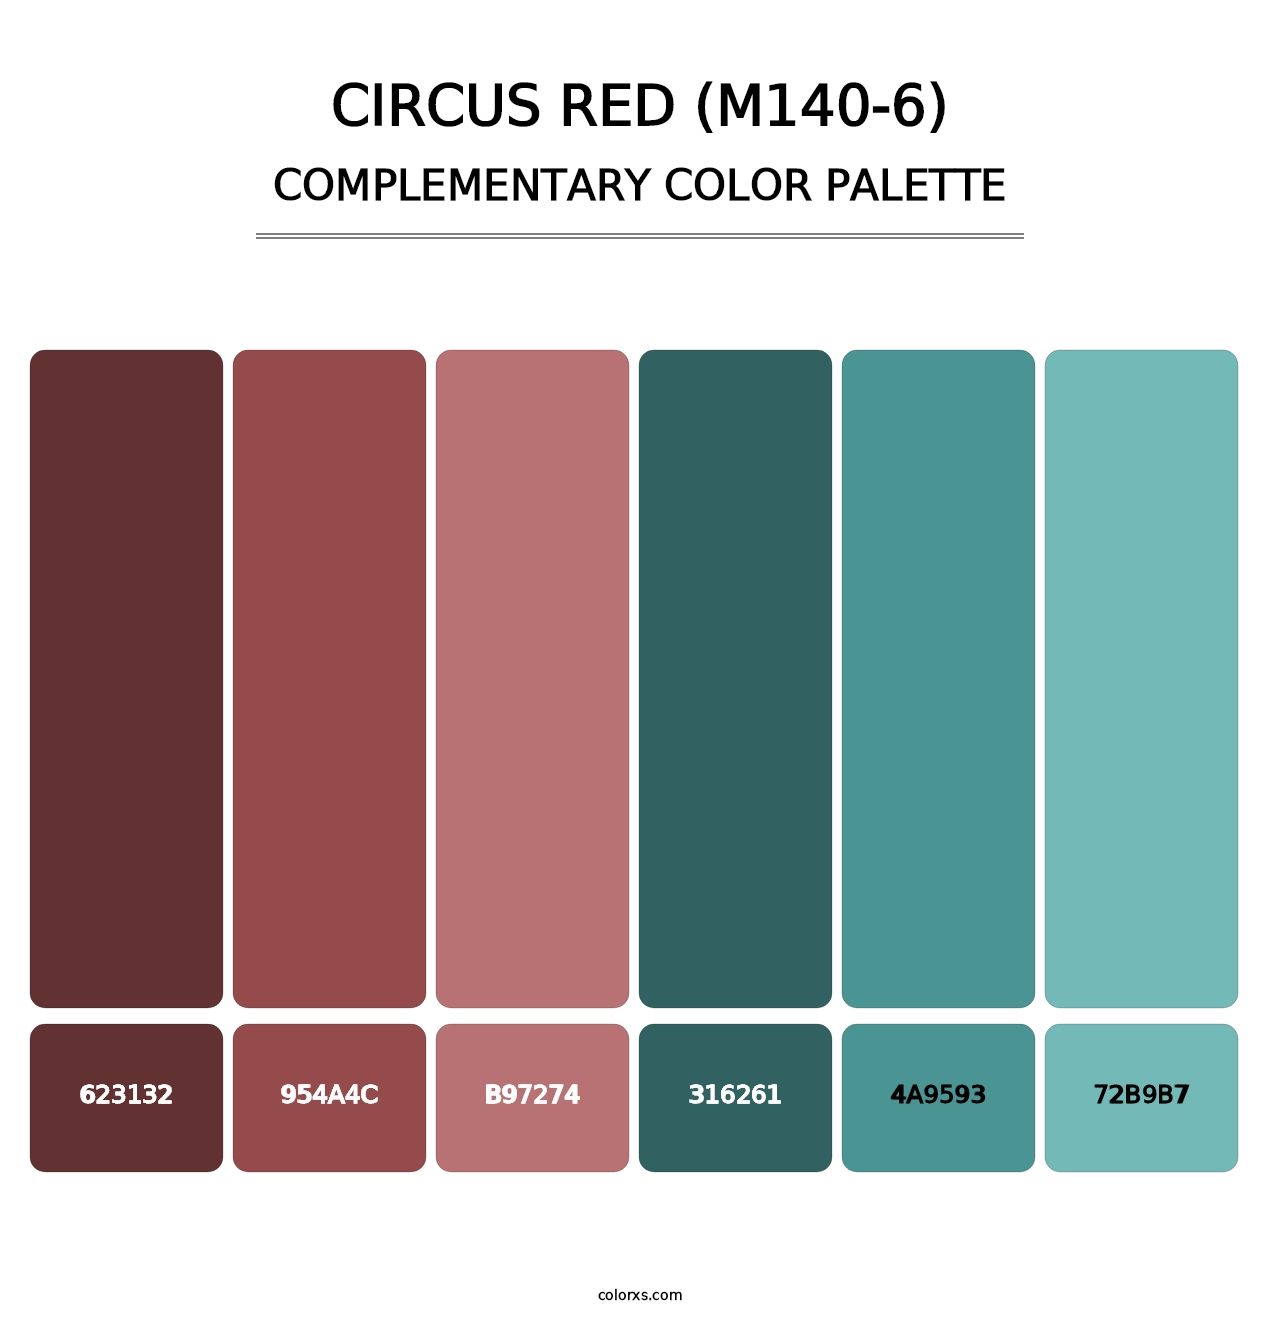 Circus Red (M140-6) - Complementary Color Palette